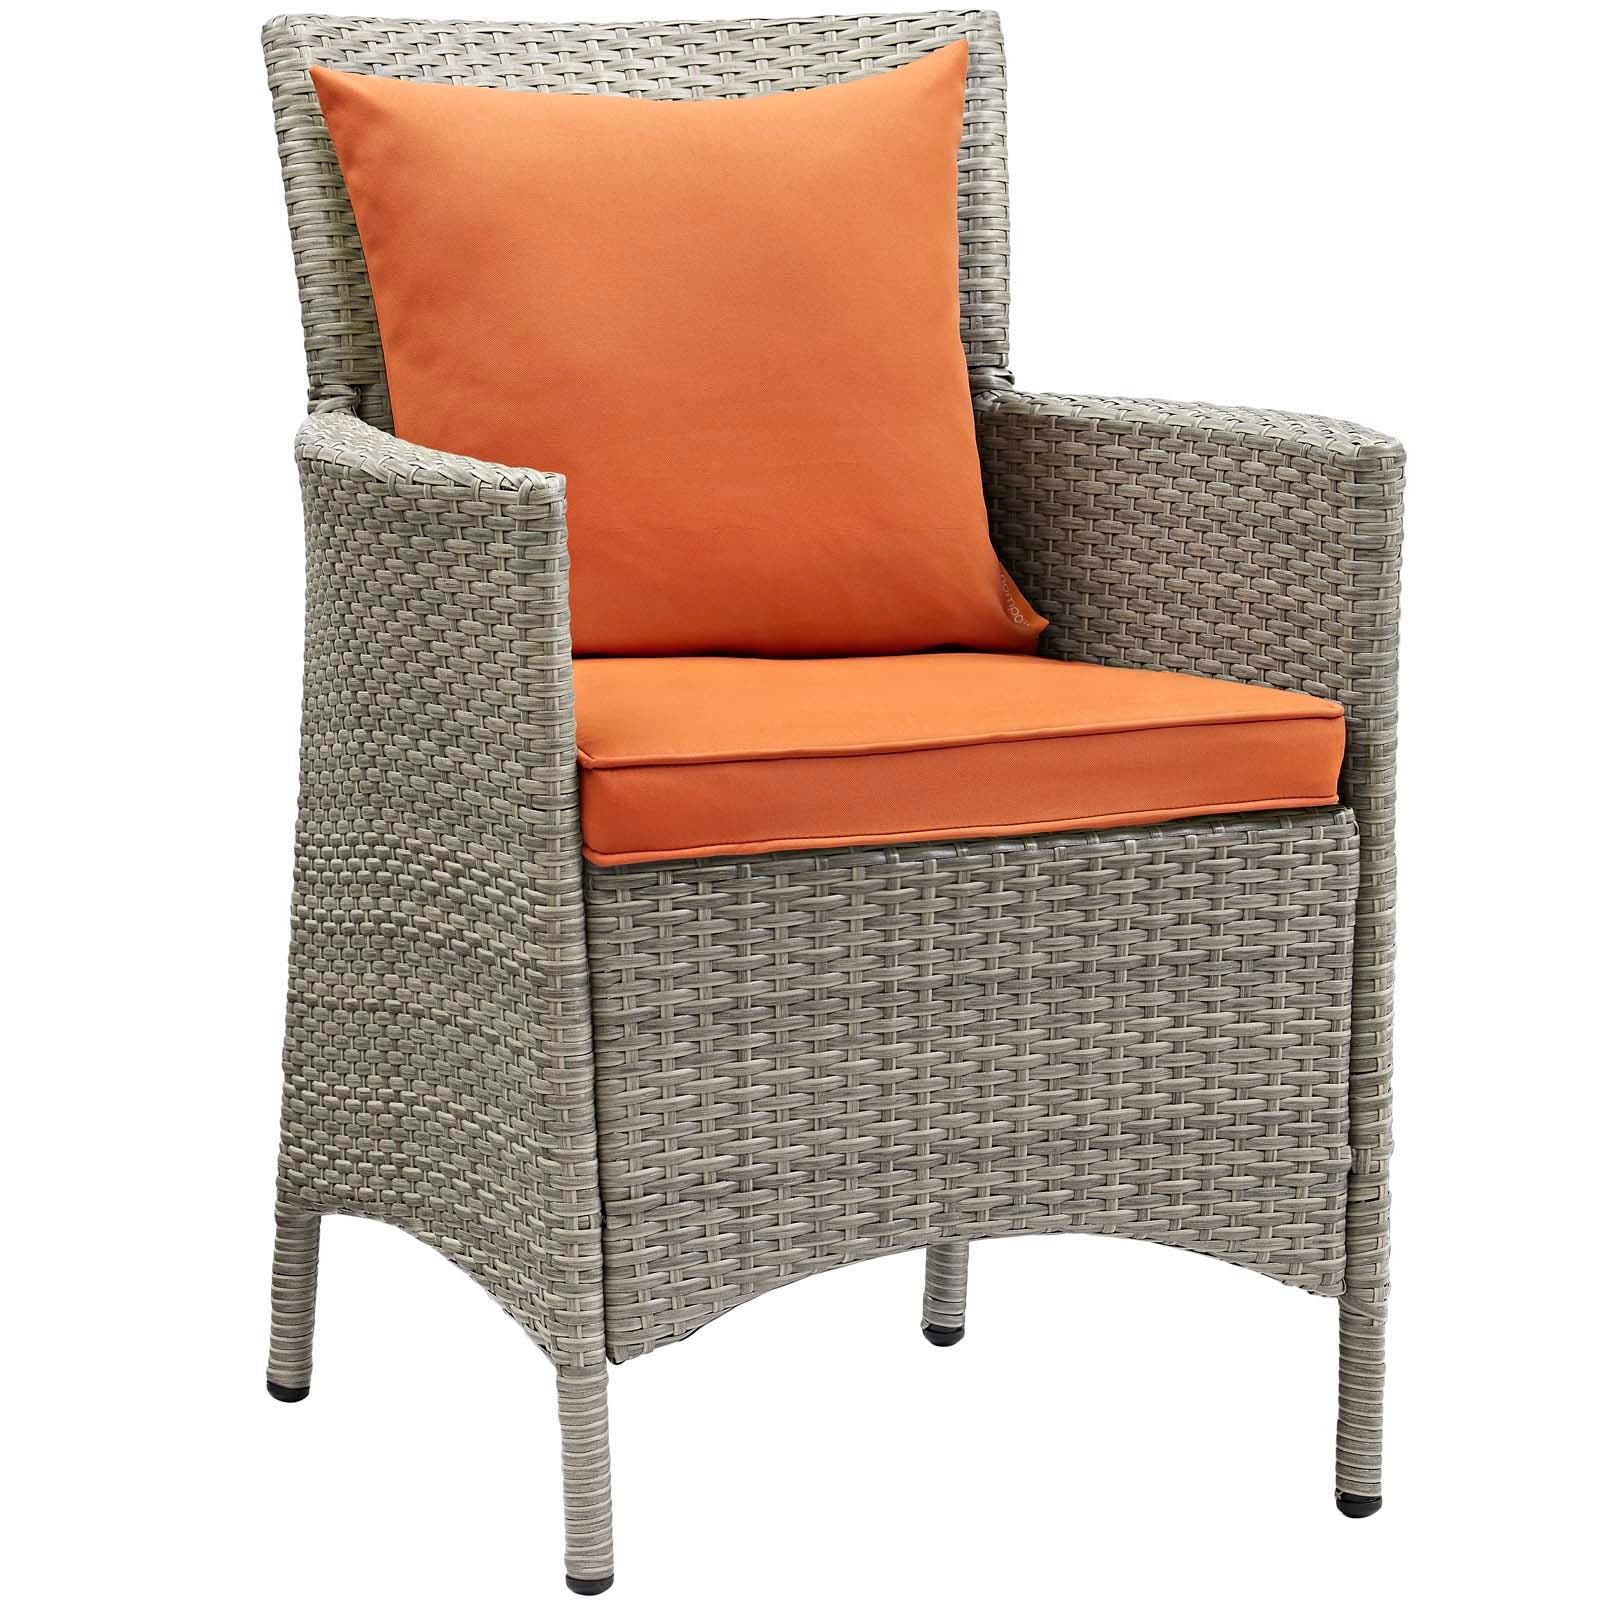 Modway Outdoor Dining Chairs - Conduit Outdoor Patio Wicker Rattan Dining Armchair Set of 4 Light Gray Orange